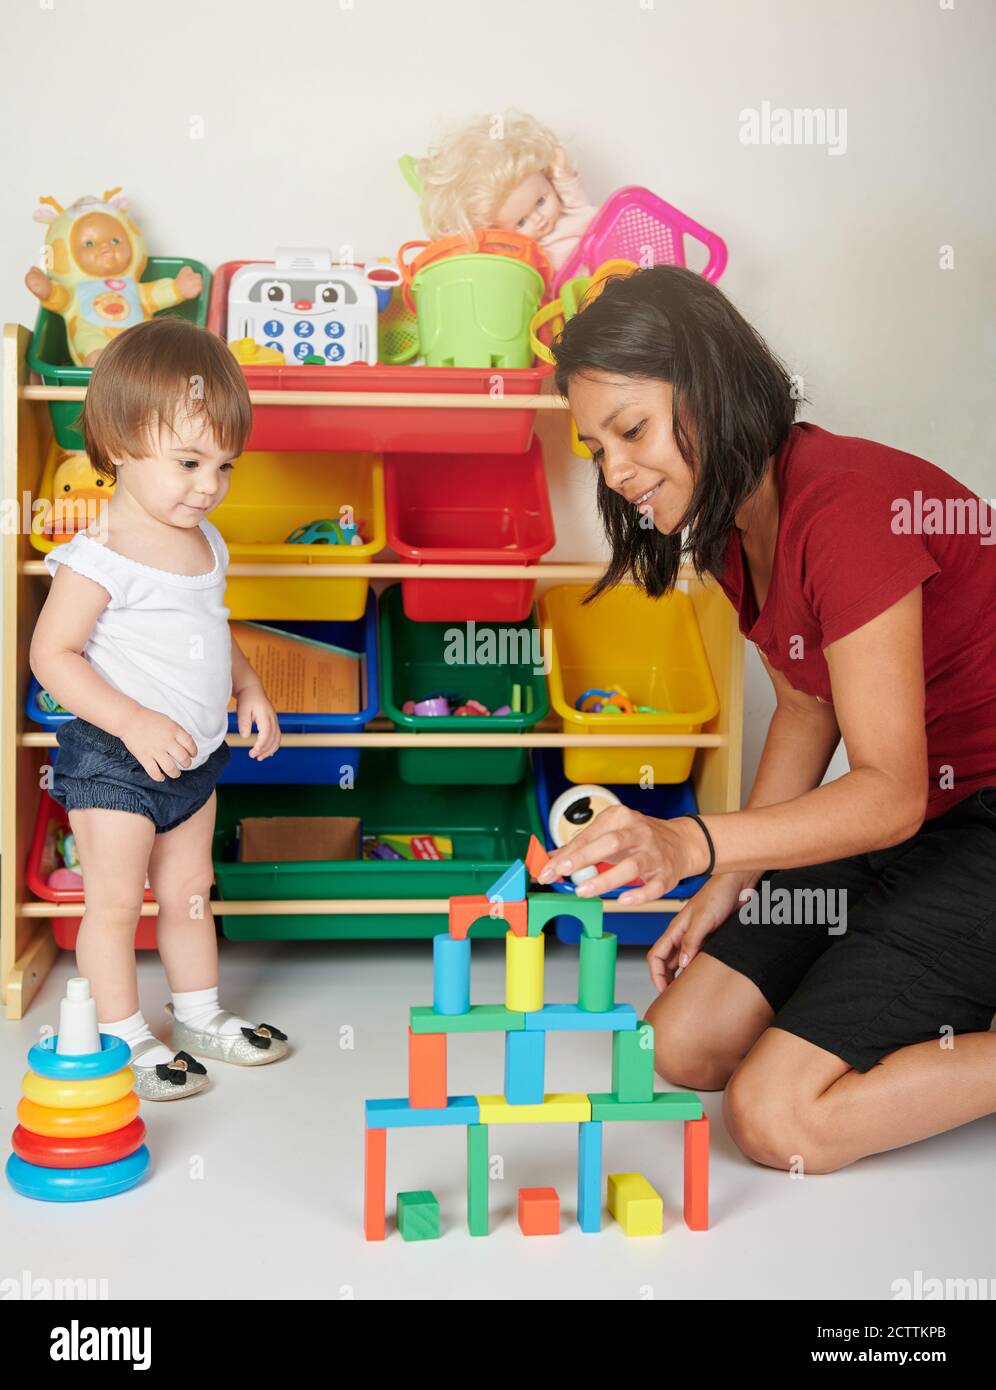 Activity for kid in daycare. Young girl play with baby wooden bricks Stock Photo